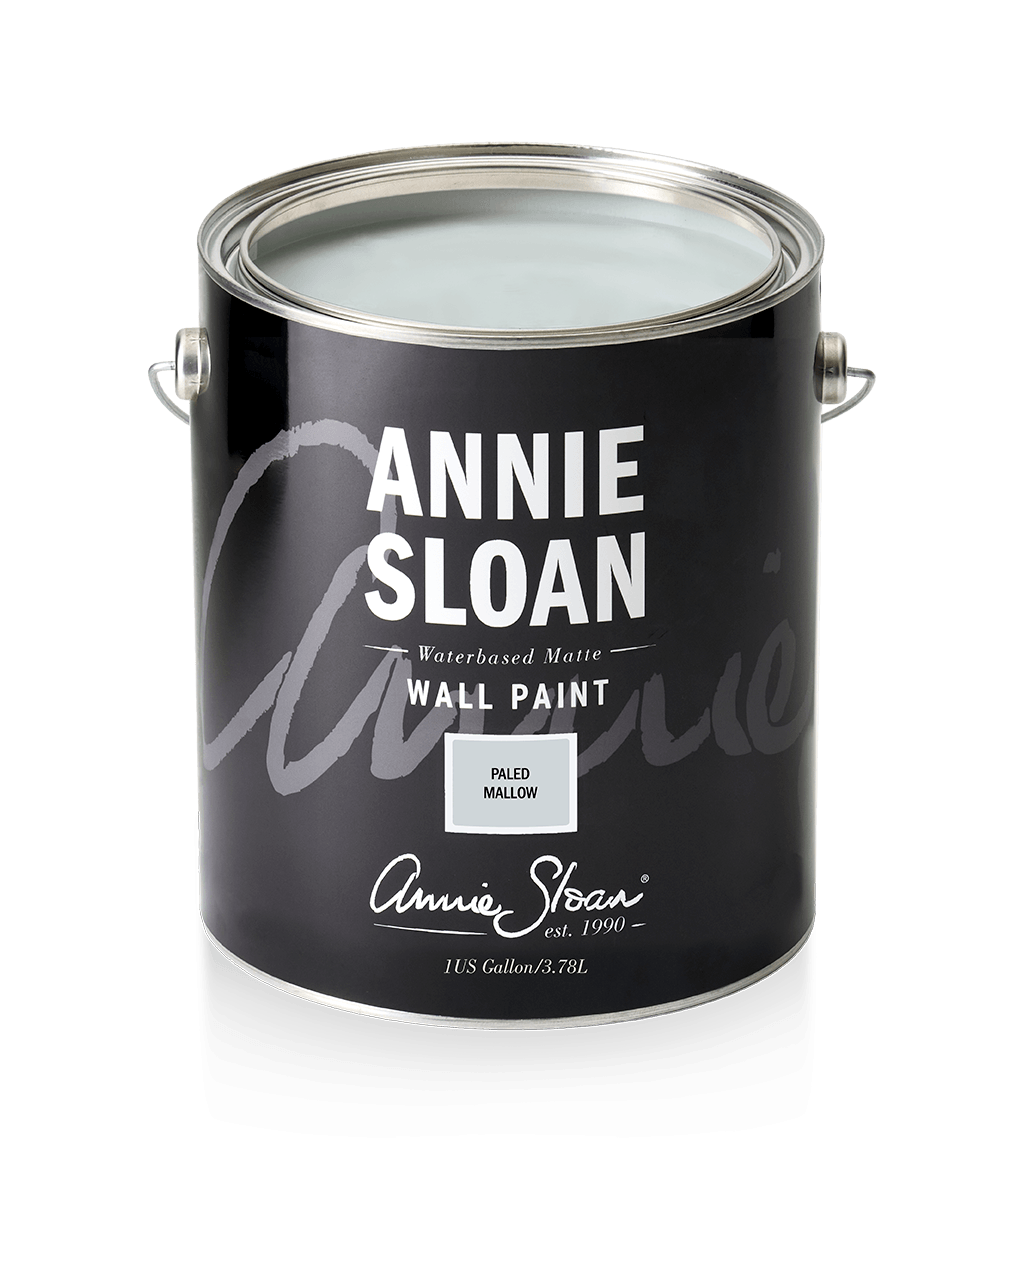 Annie Sloan Wall Paint Paled Mallow - 1 Gallon - Five and Divine